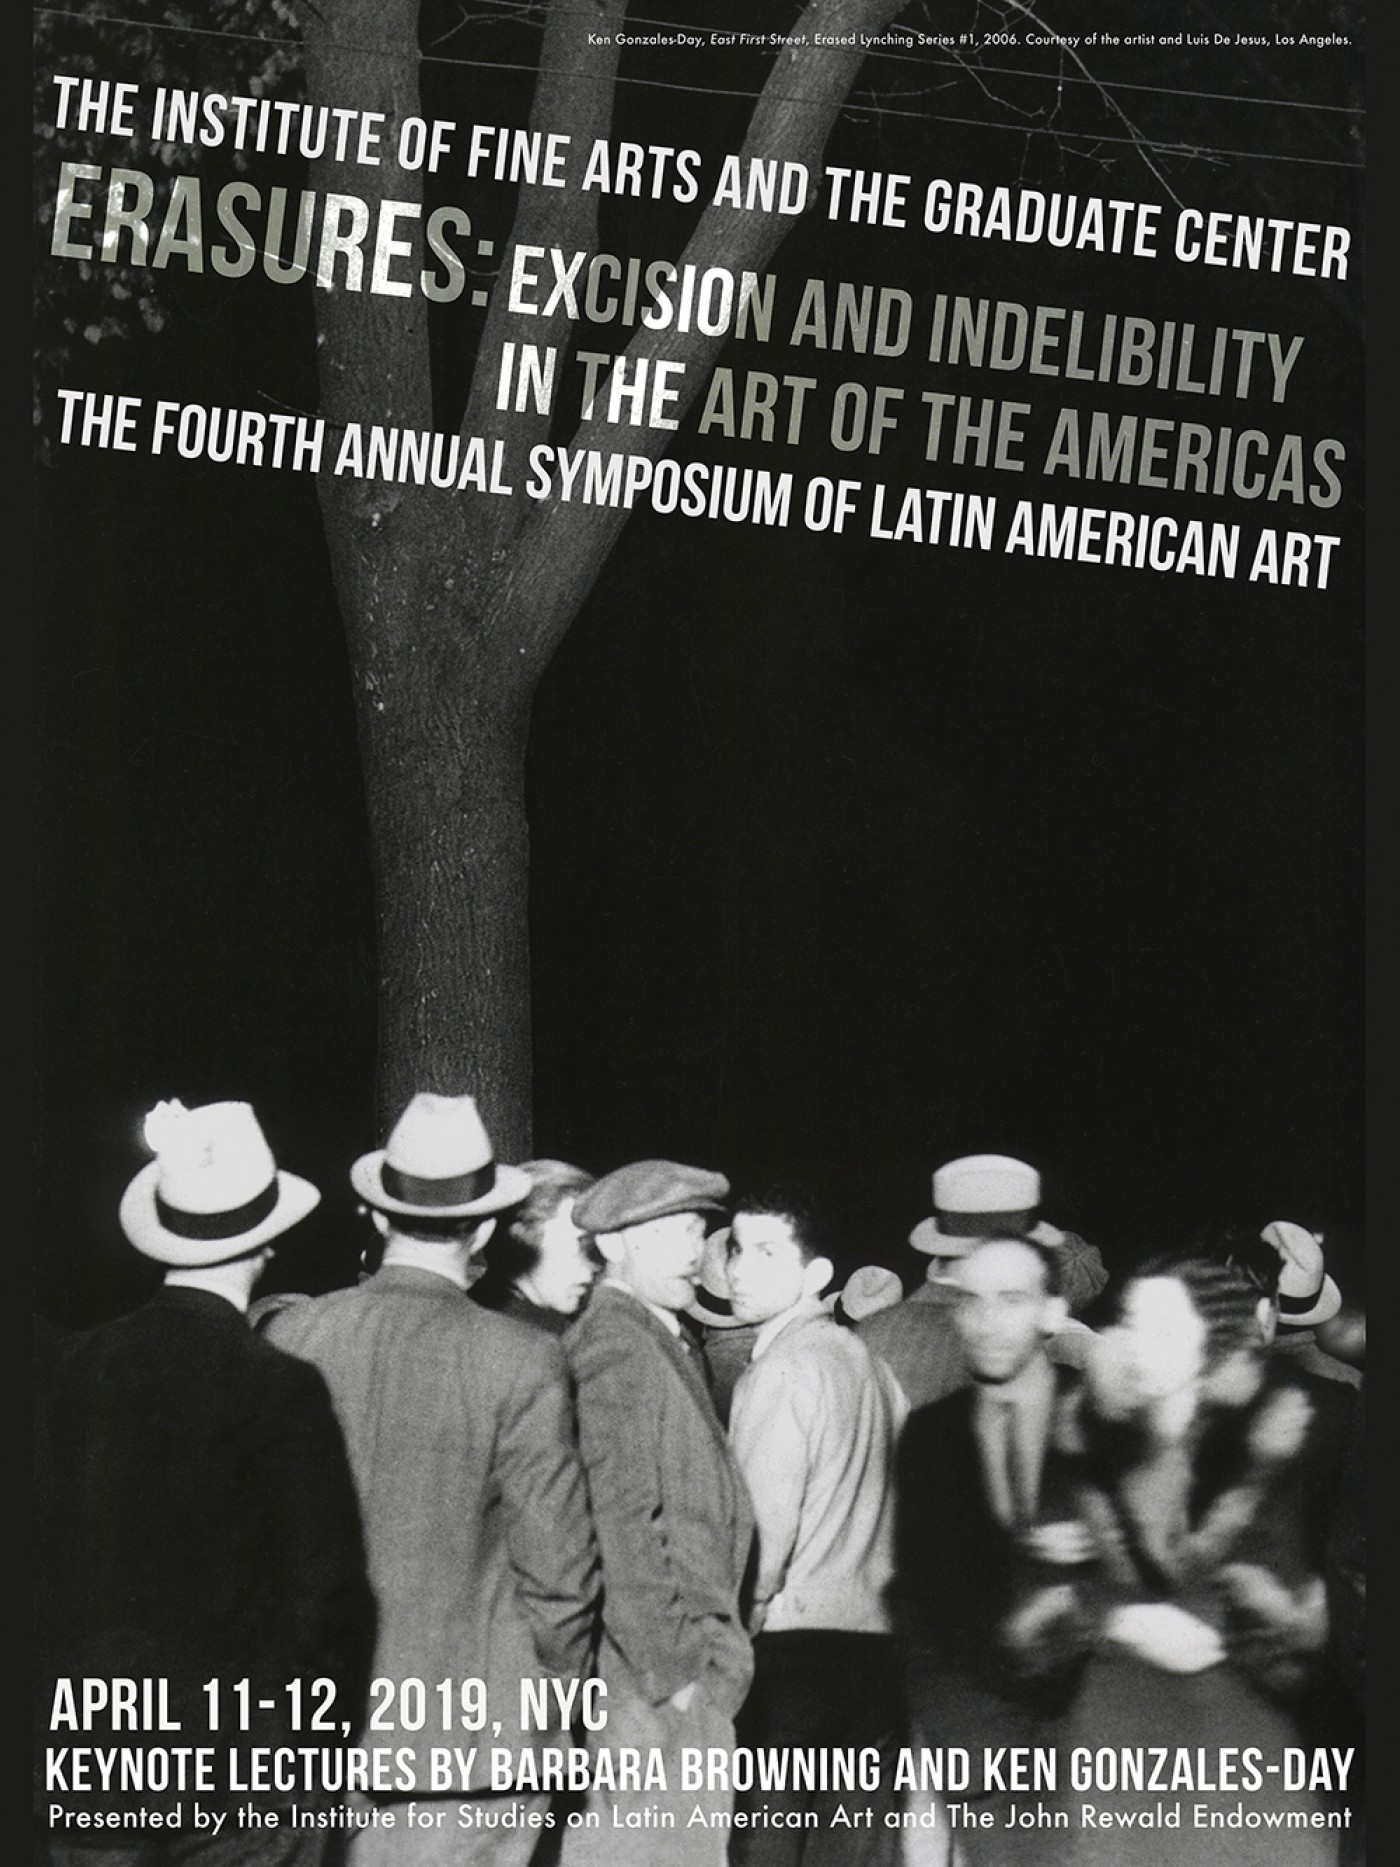 Black and white photograph of a crowd looking at a tree with text describing Fourth Annual Symposium of Latin American Art.